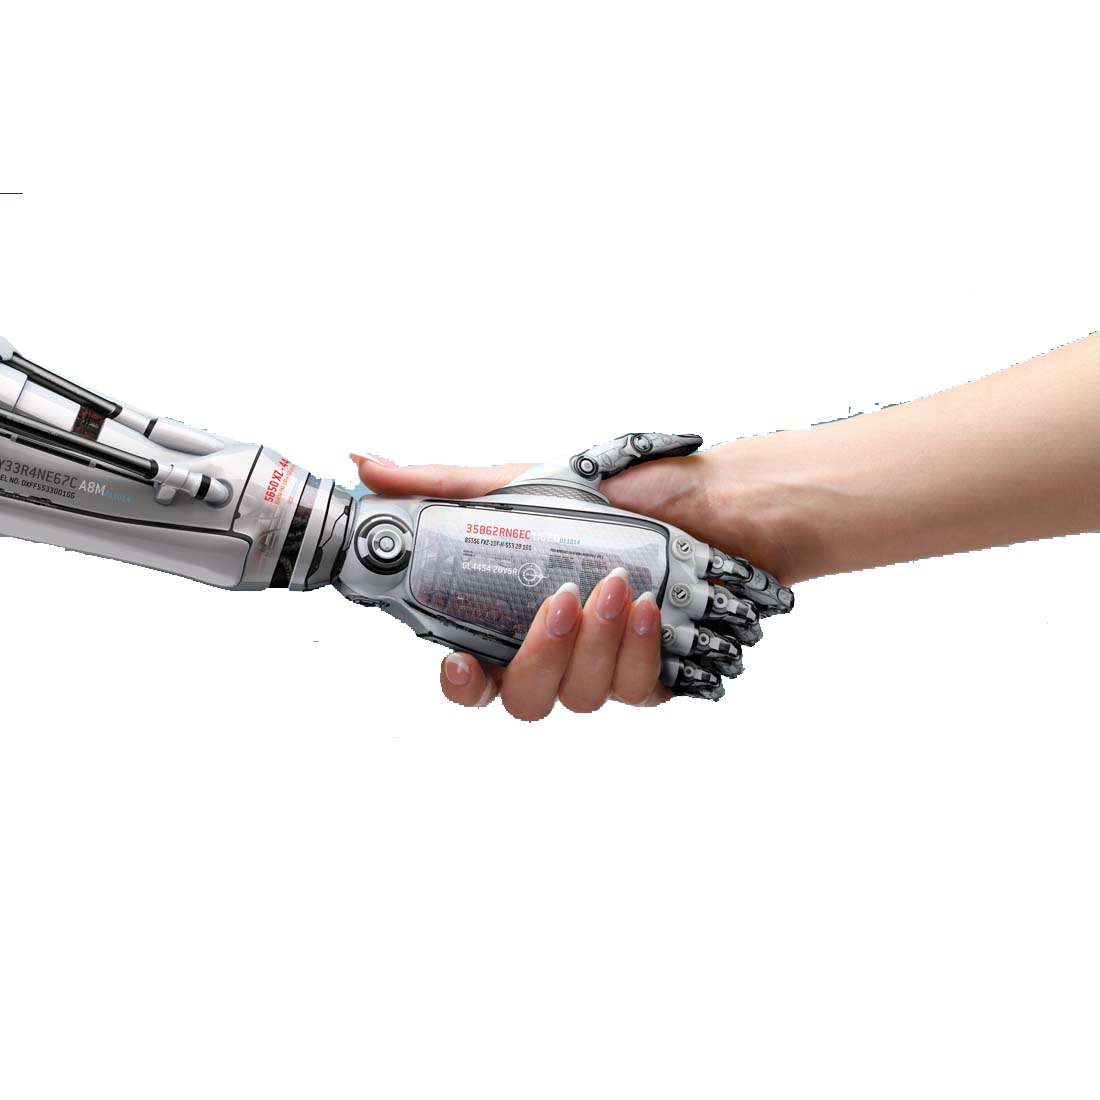 AI and Human shaking hands